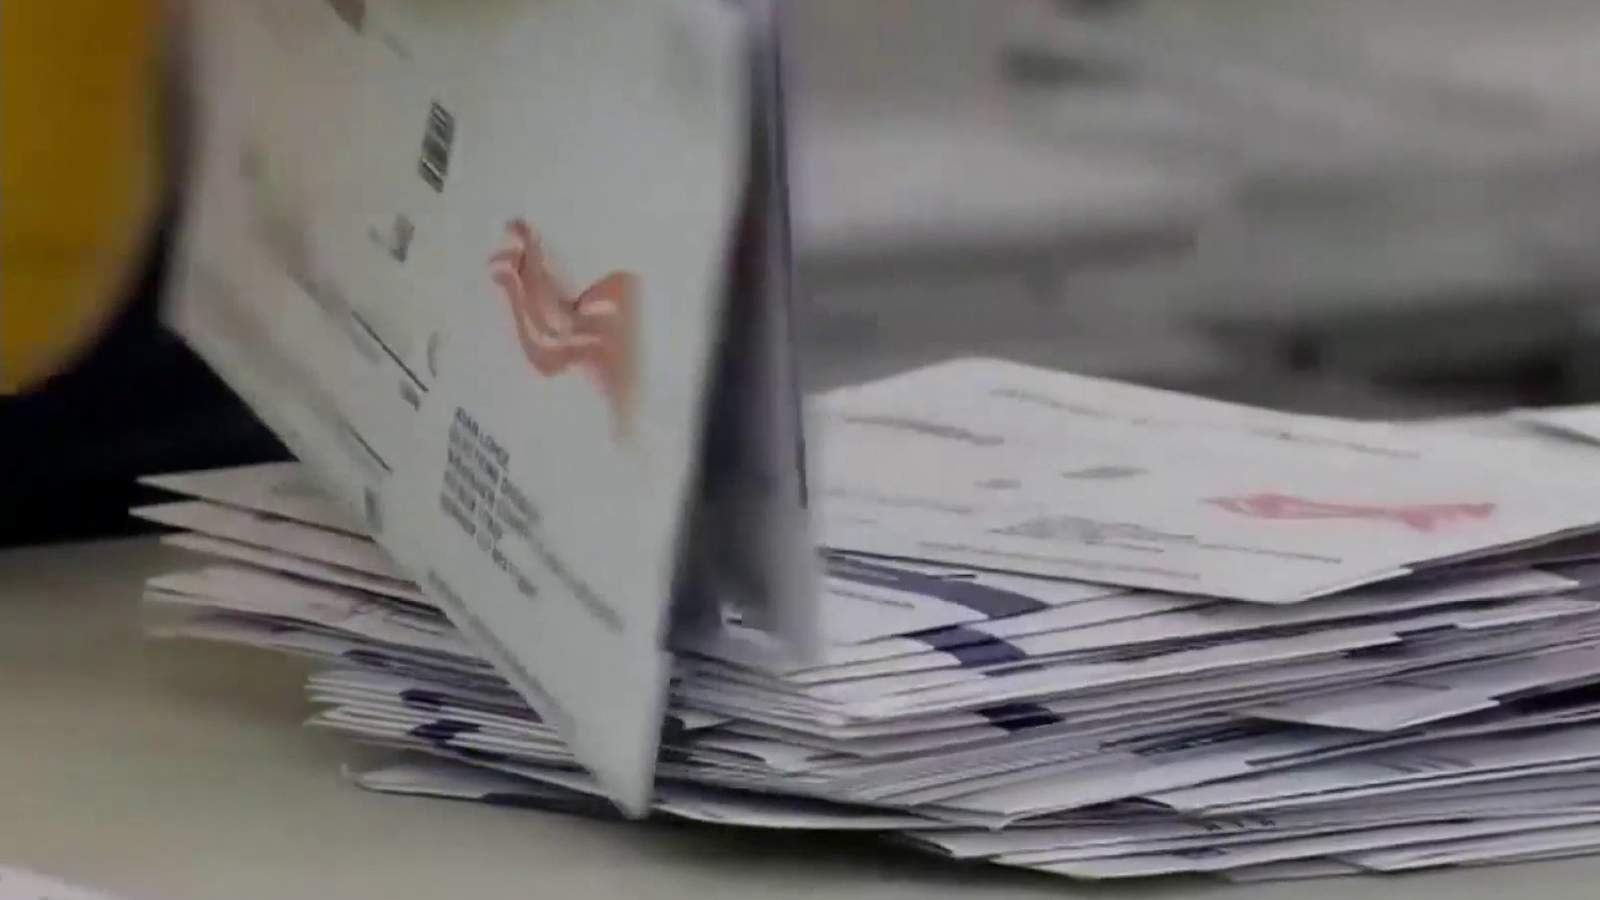 President Trump claims universal mail-in ballots lead to fraud; experts say vote-by-mail is safe